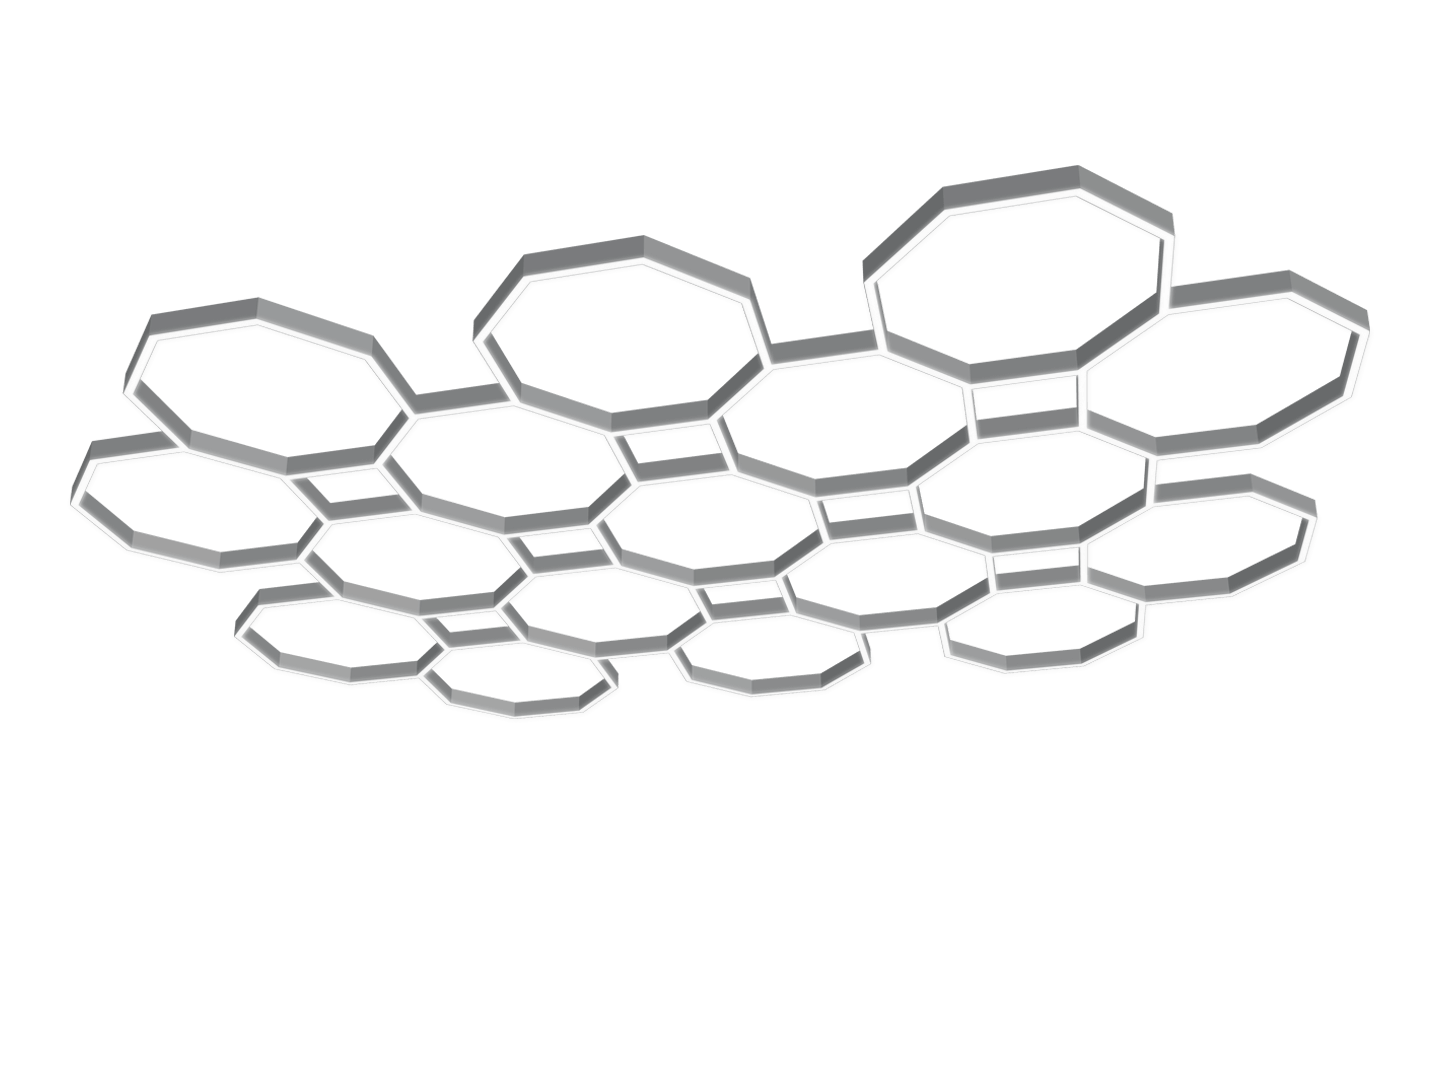 Octagon shaped lights in a honeycomb pattern